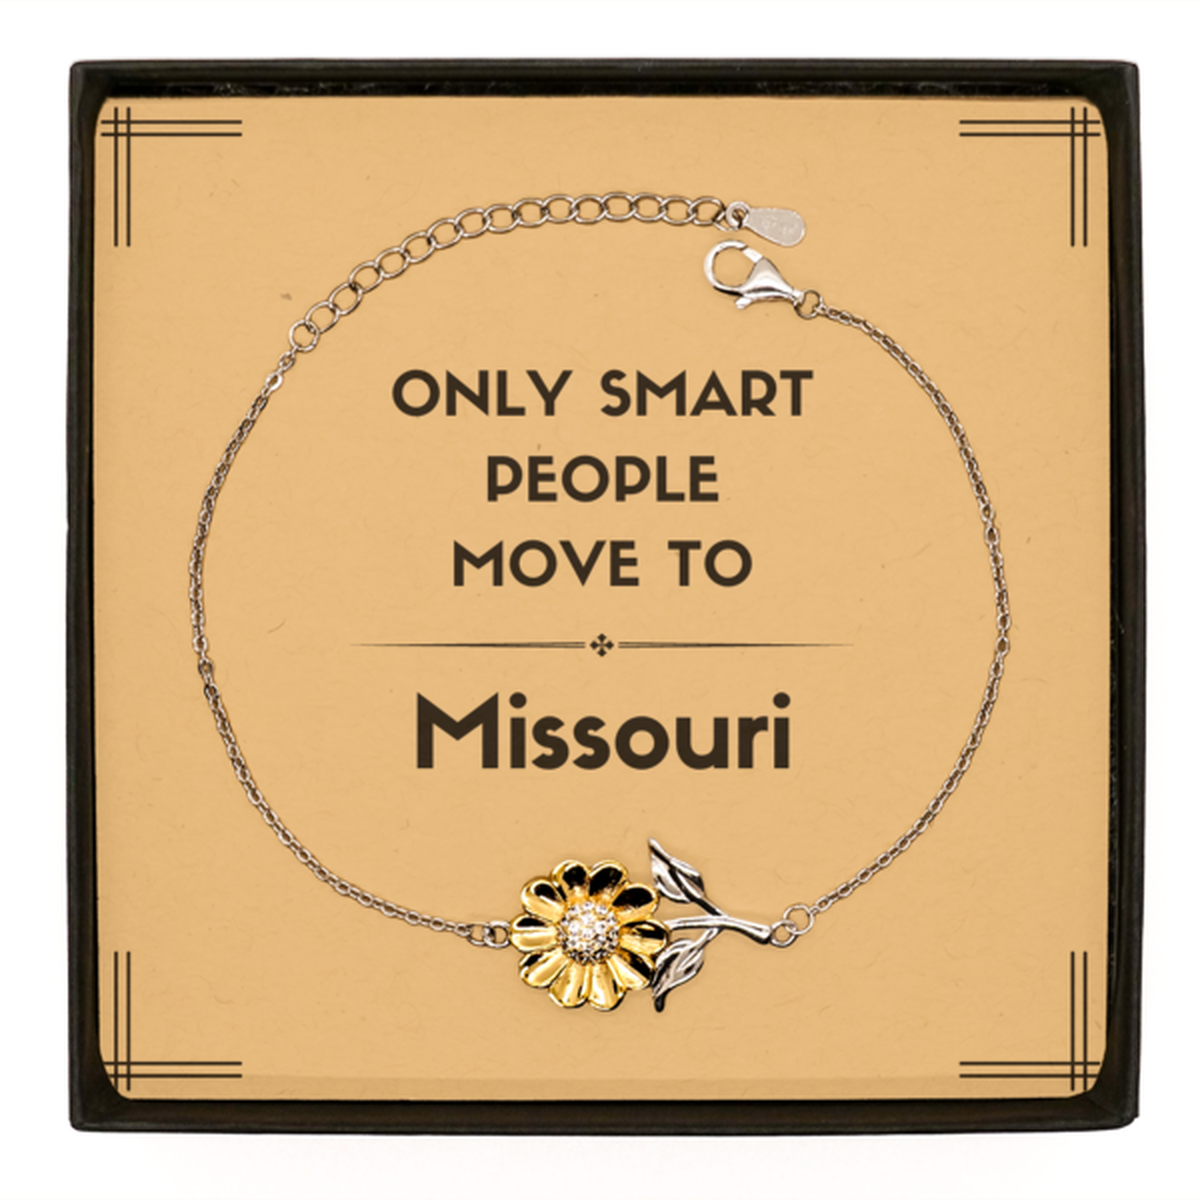 Only smart people move to Missouri Sunflower Bracelet, Message Card Gifts For Missouri, Move to Missouri Gifts for Friends Coworker Funny Saying Quote